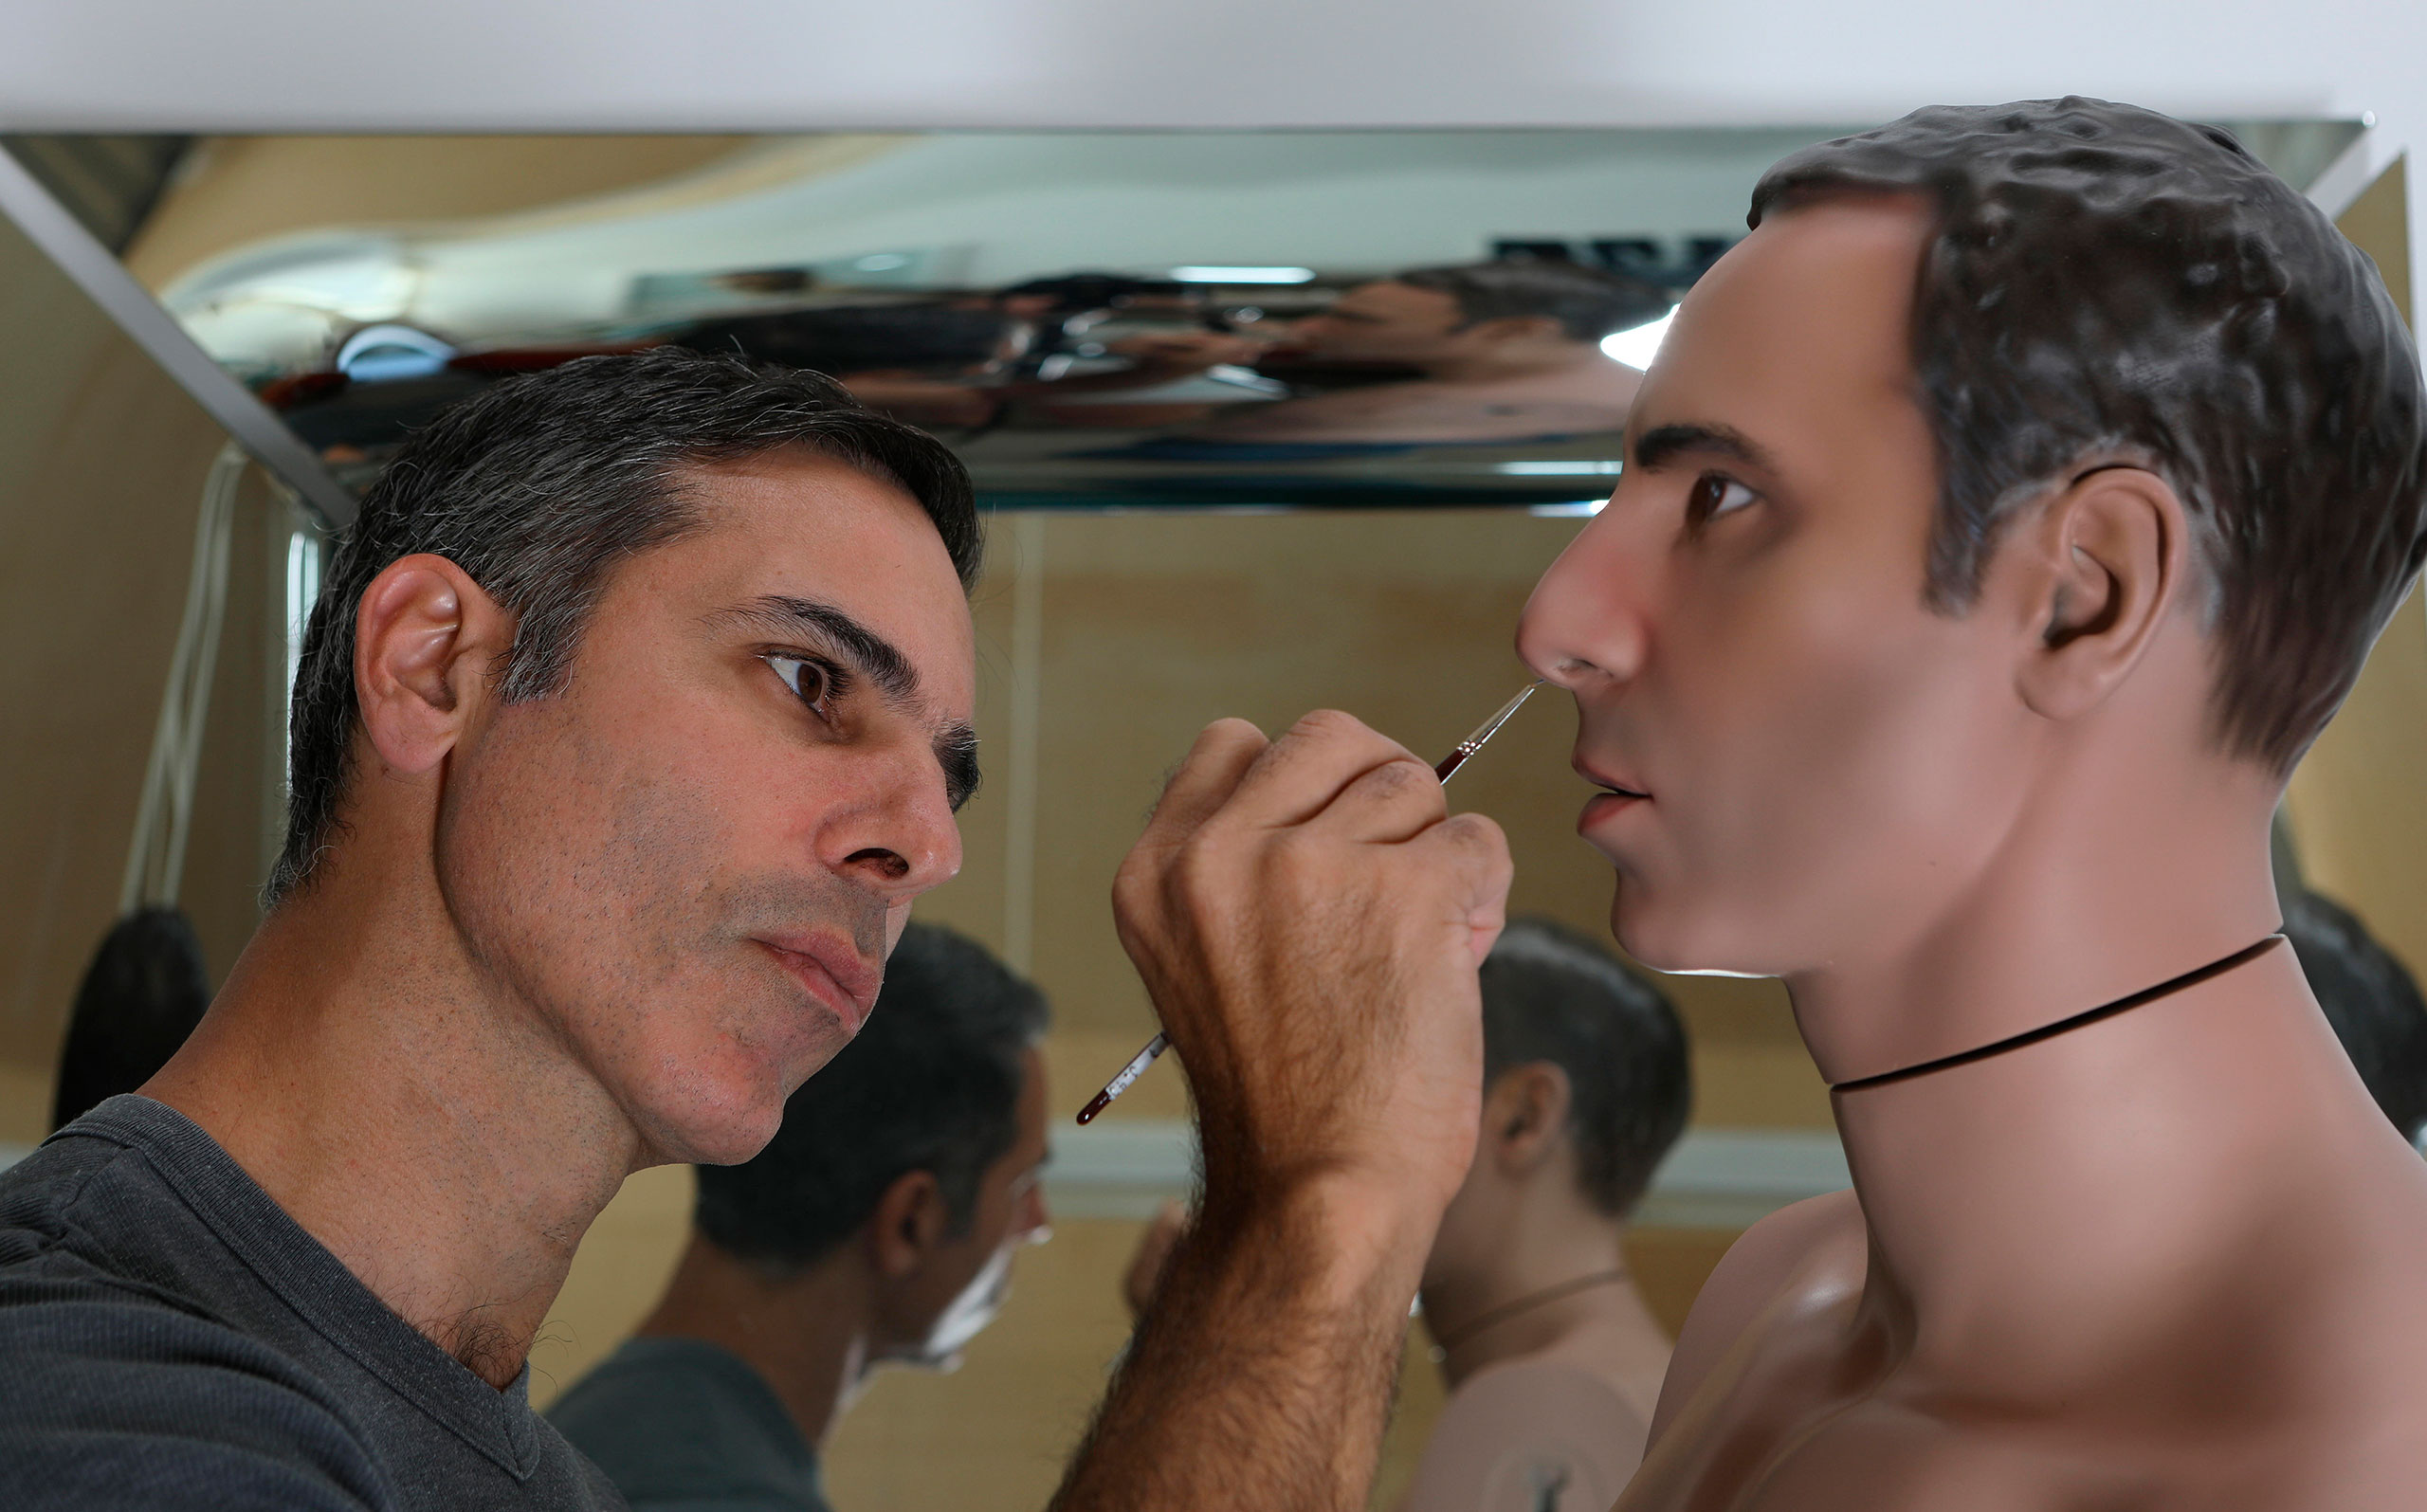 Michael Zavros working on his ‘Dad’ mannequin, 2020. Image courtesy of Michael Zavros. © Michael Zavros 